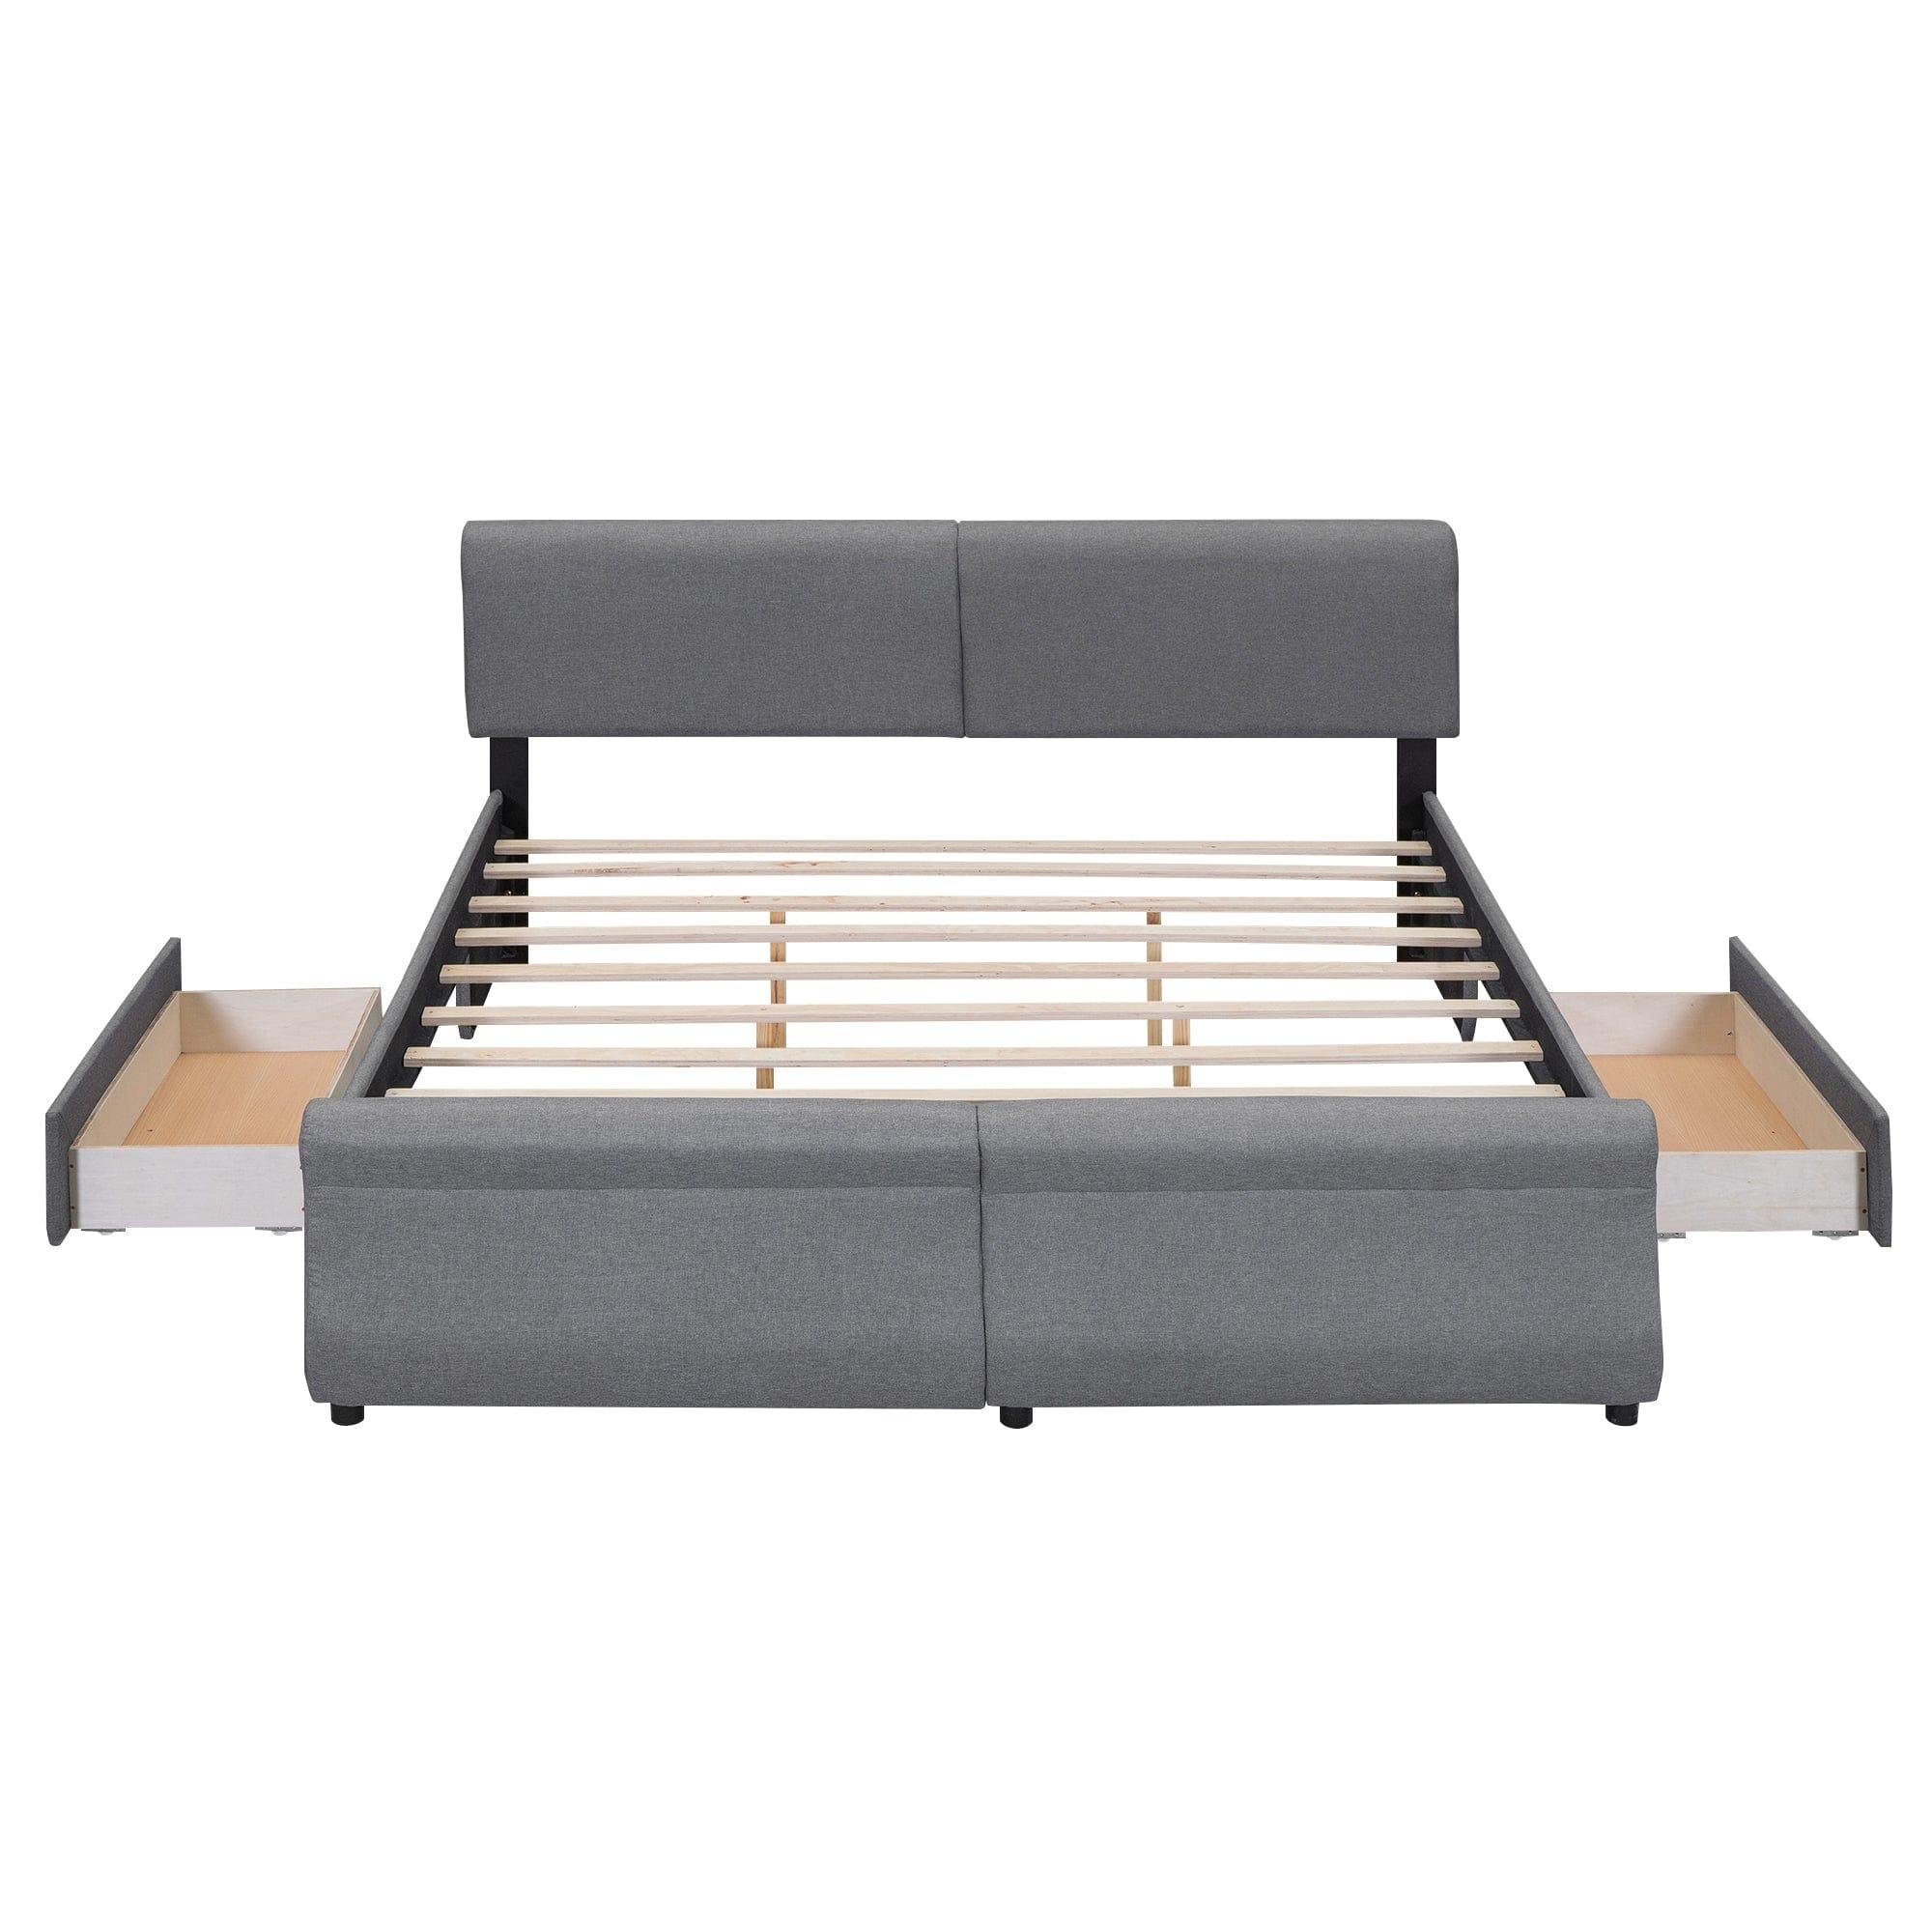 Shop King Size Upholstery Platform Bed with Two Drawers, Gray Mademoiselle Home Decor